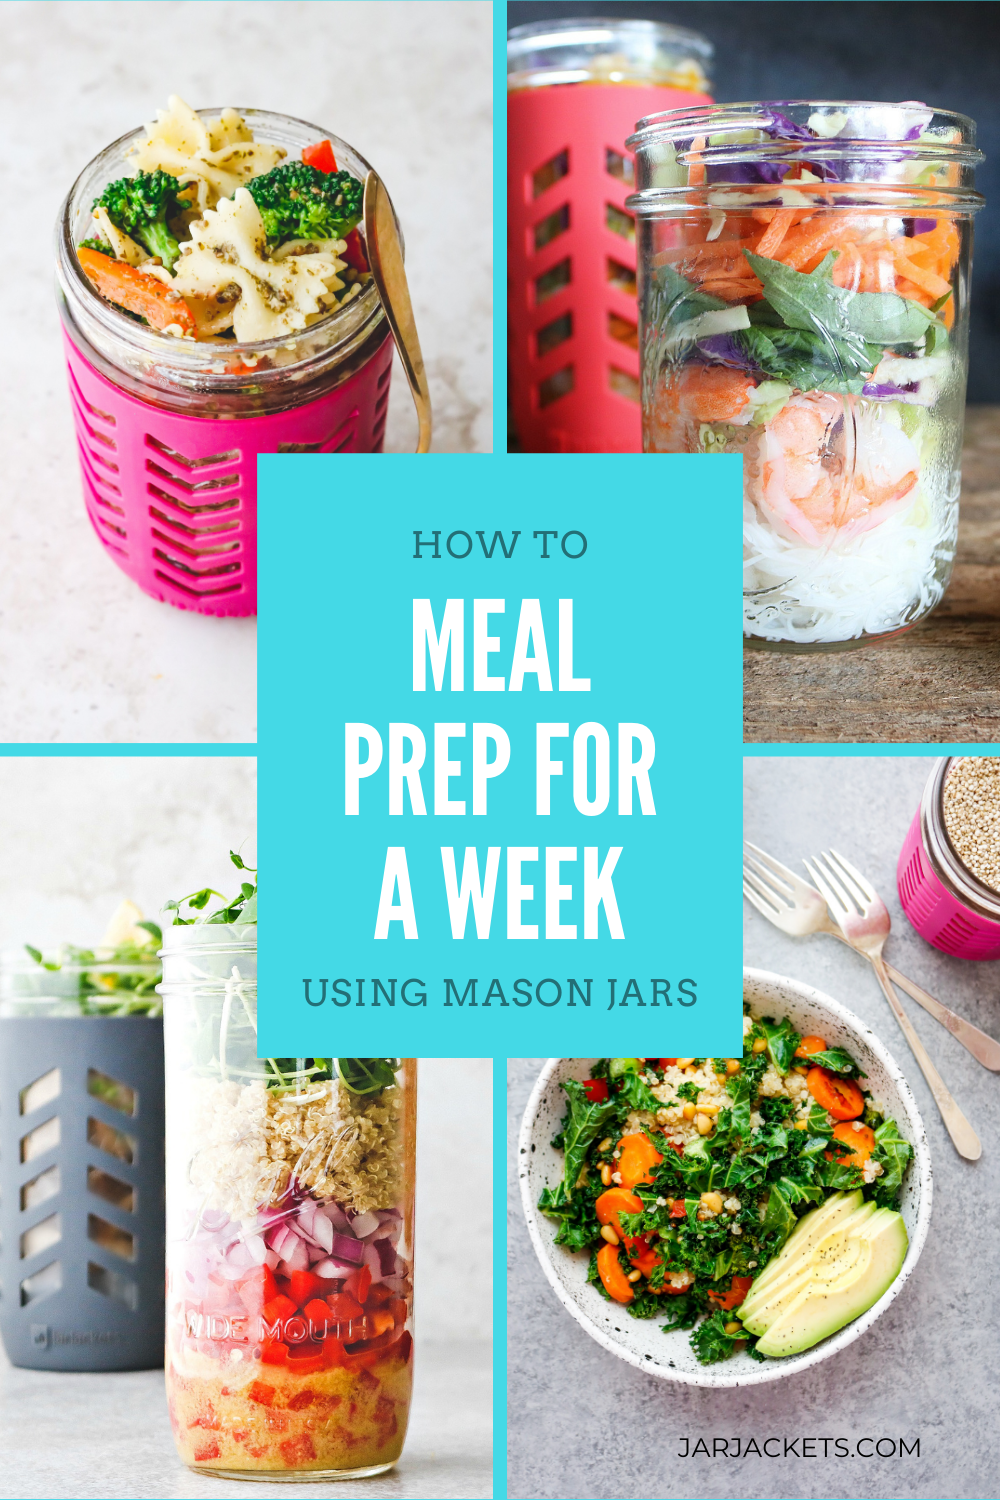 Meal Prepping Recipes for Mason Jars